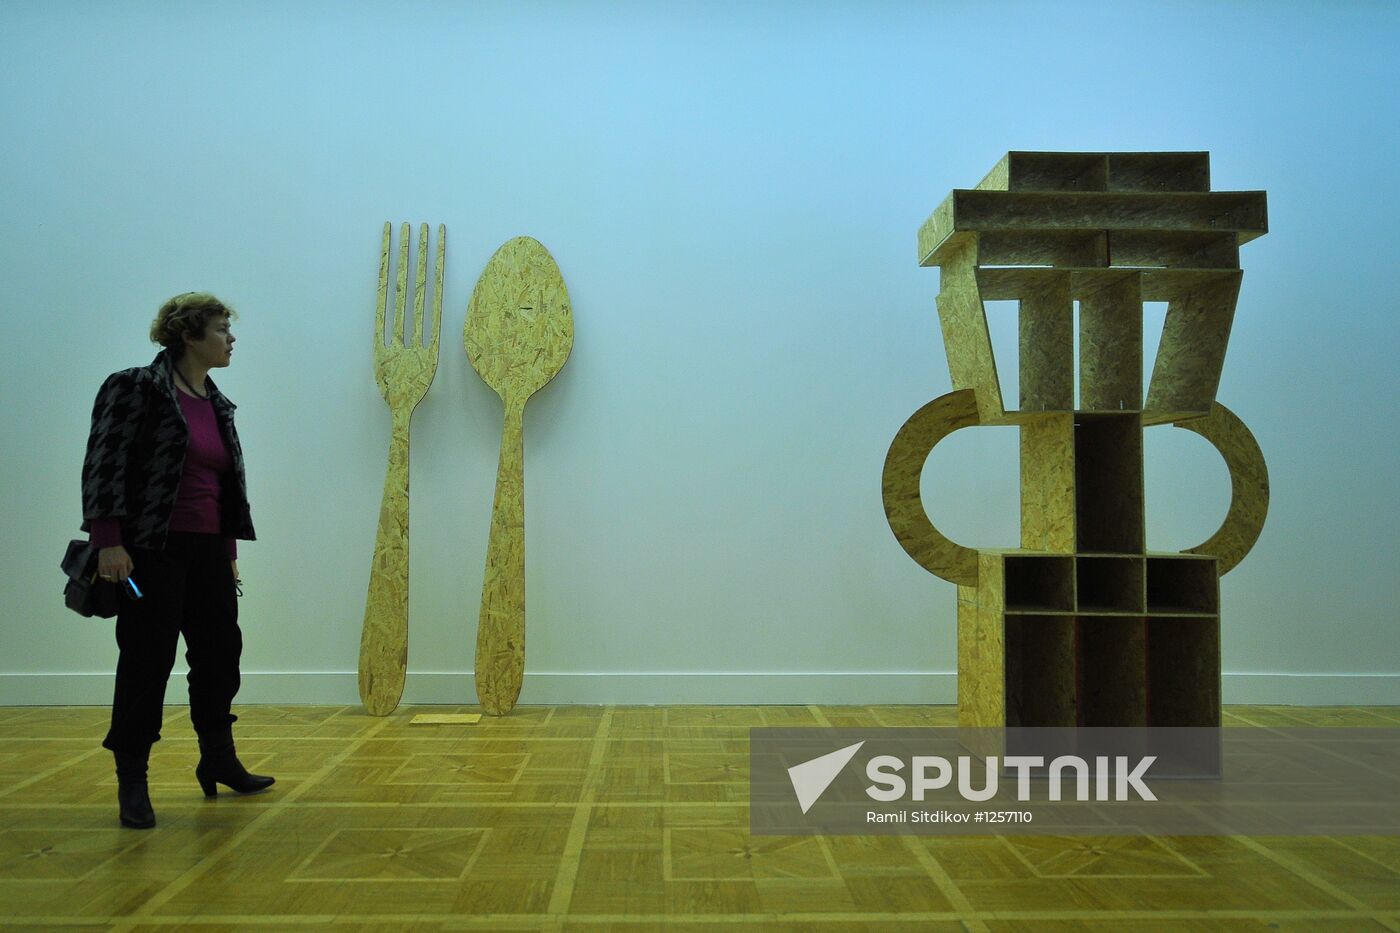 Moscow Design Week 2012 festival opens